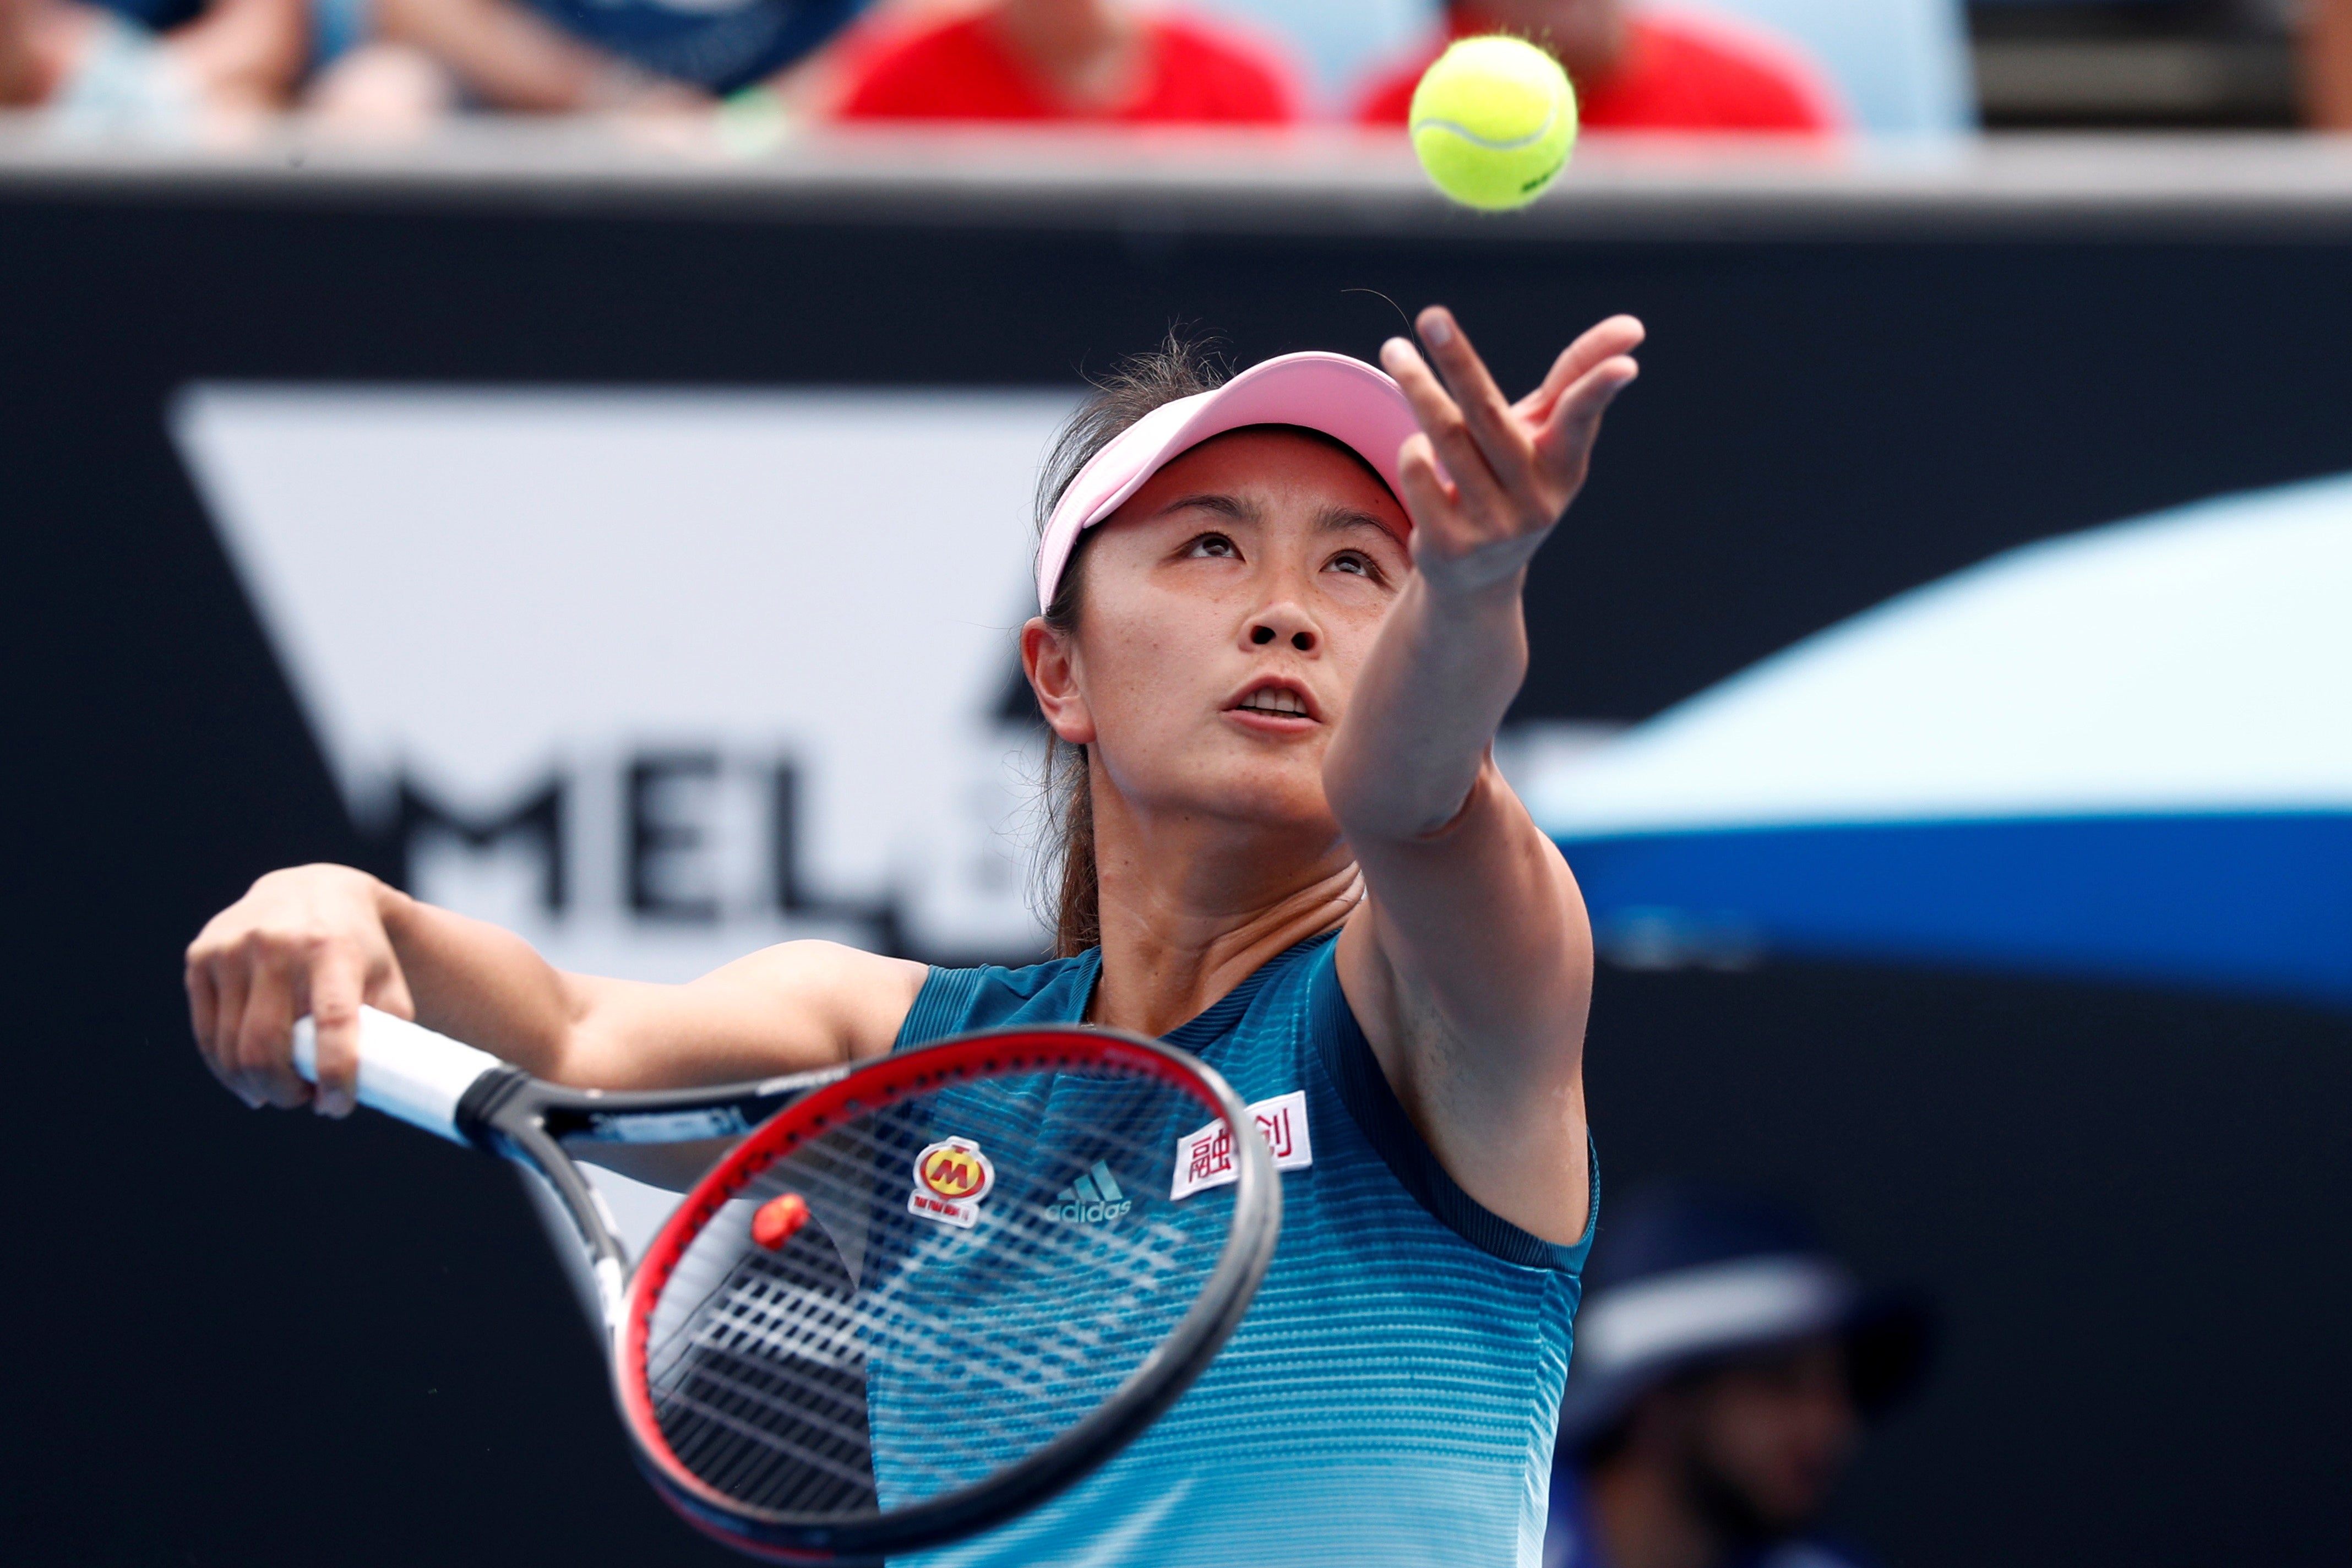 Chinese tennis star Peng Shuai has accused retired Communist Party official Zhang Gaoli of sexual misconduct